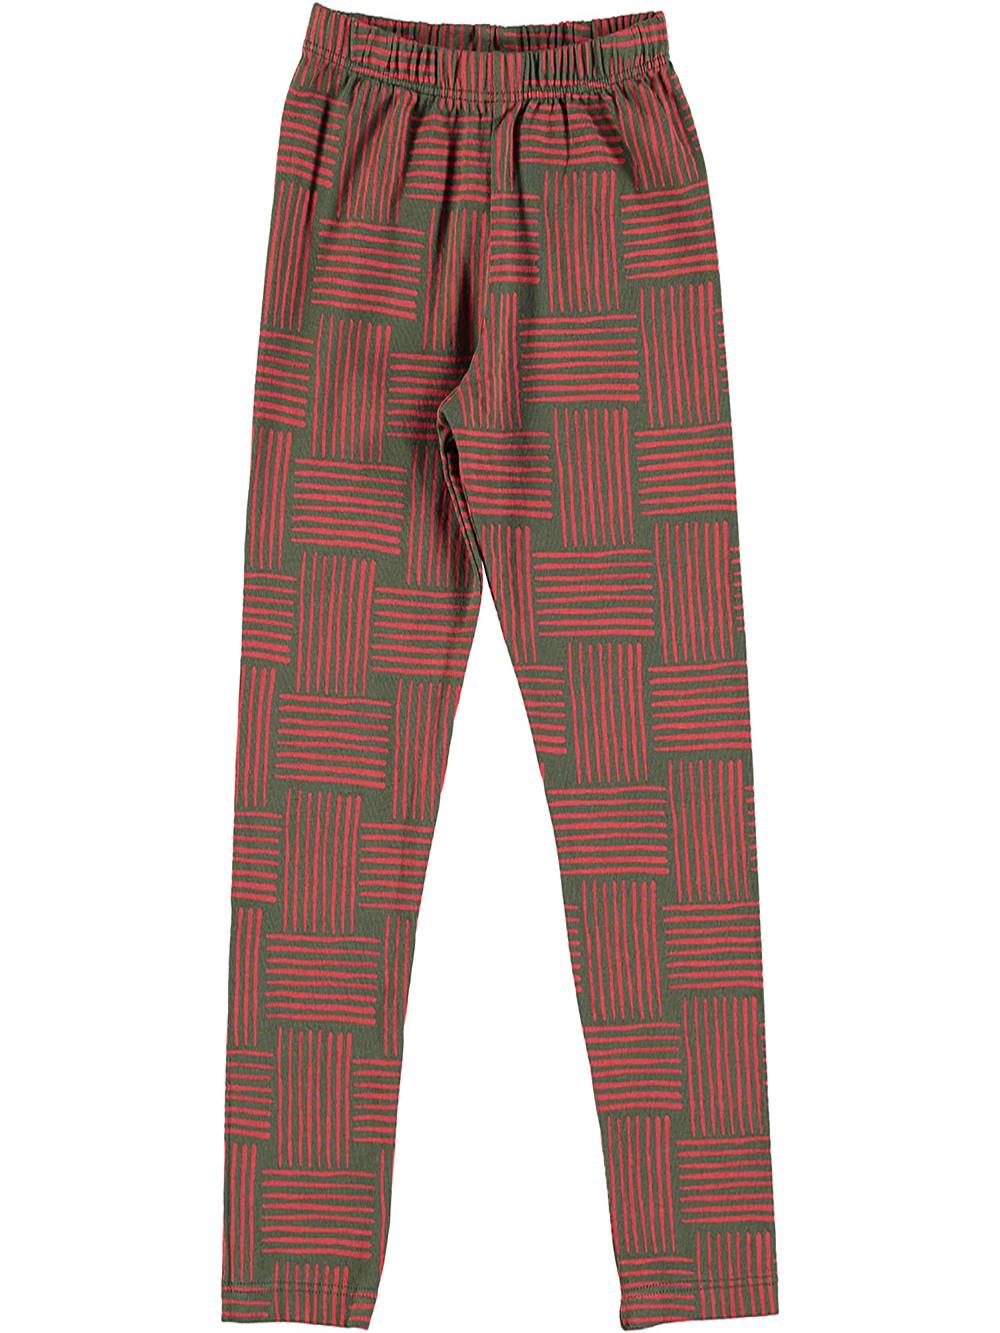 KHAKI GREEN TIGHTS WITH RED LINES PRINT